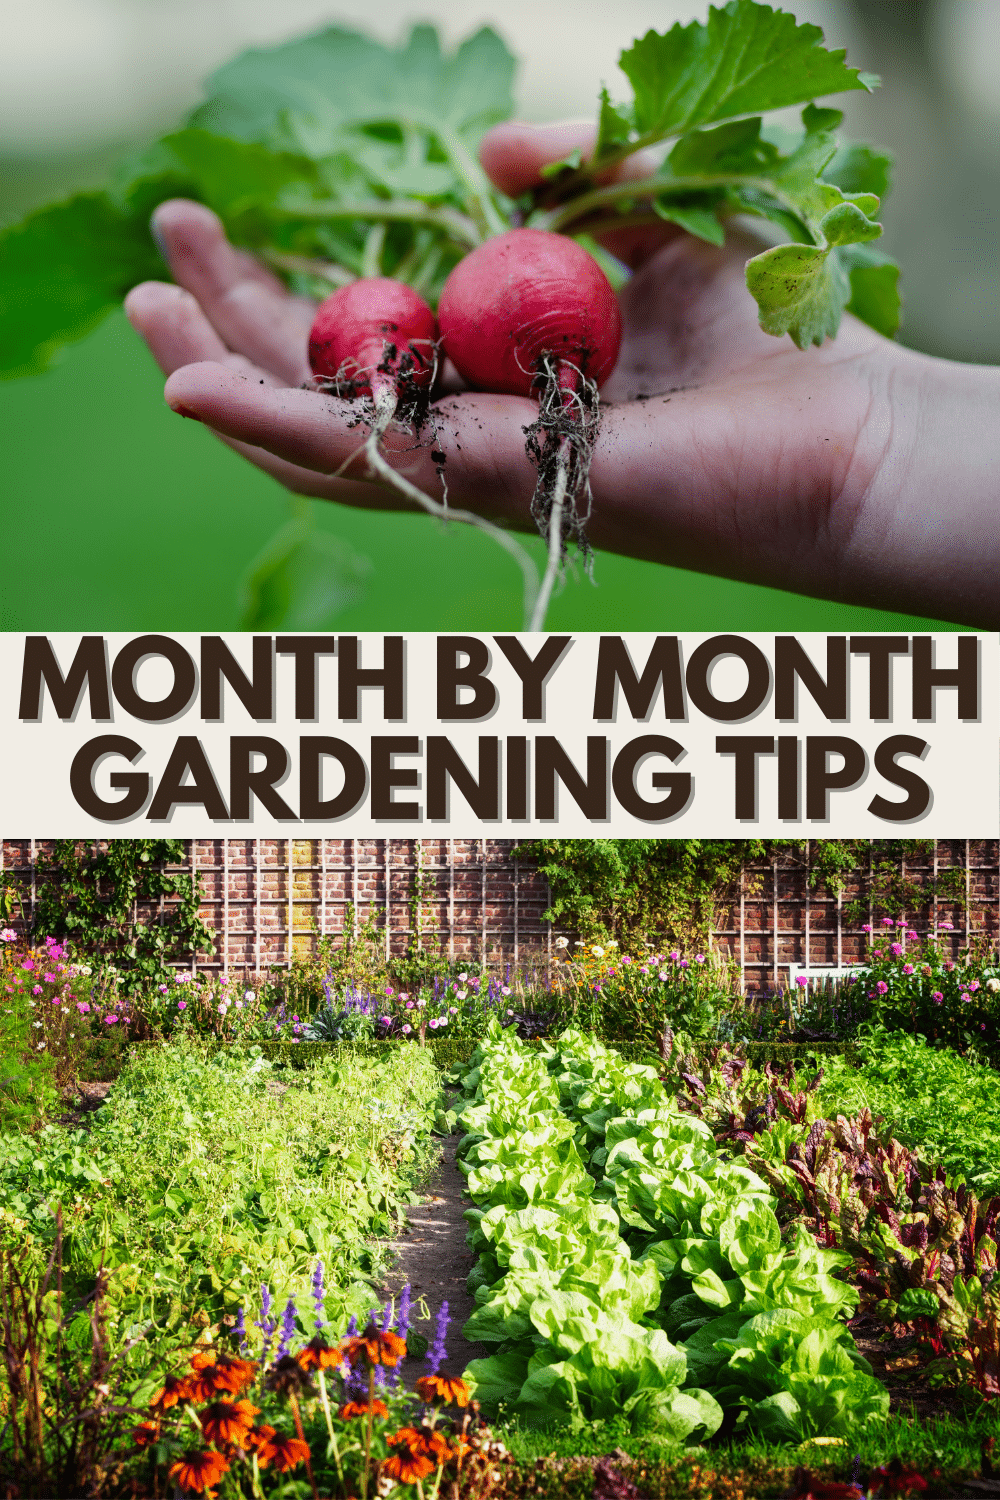 Looking for some month by month gardening tips to help you plan and get ahead of the game? You'll find that and so much more here! #gardening #gardeningtips #garden via @wondermomwannab